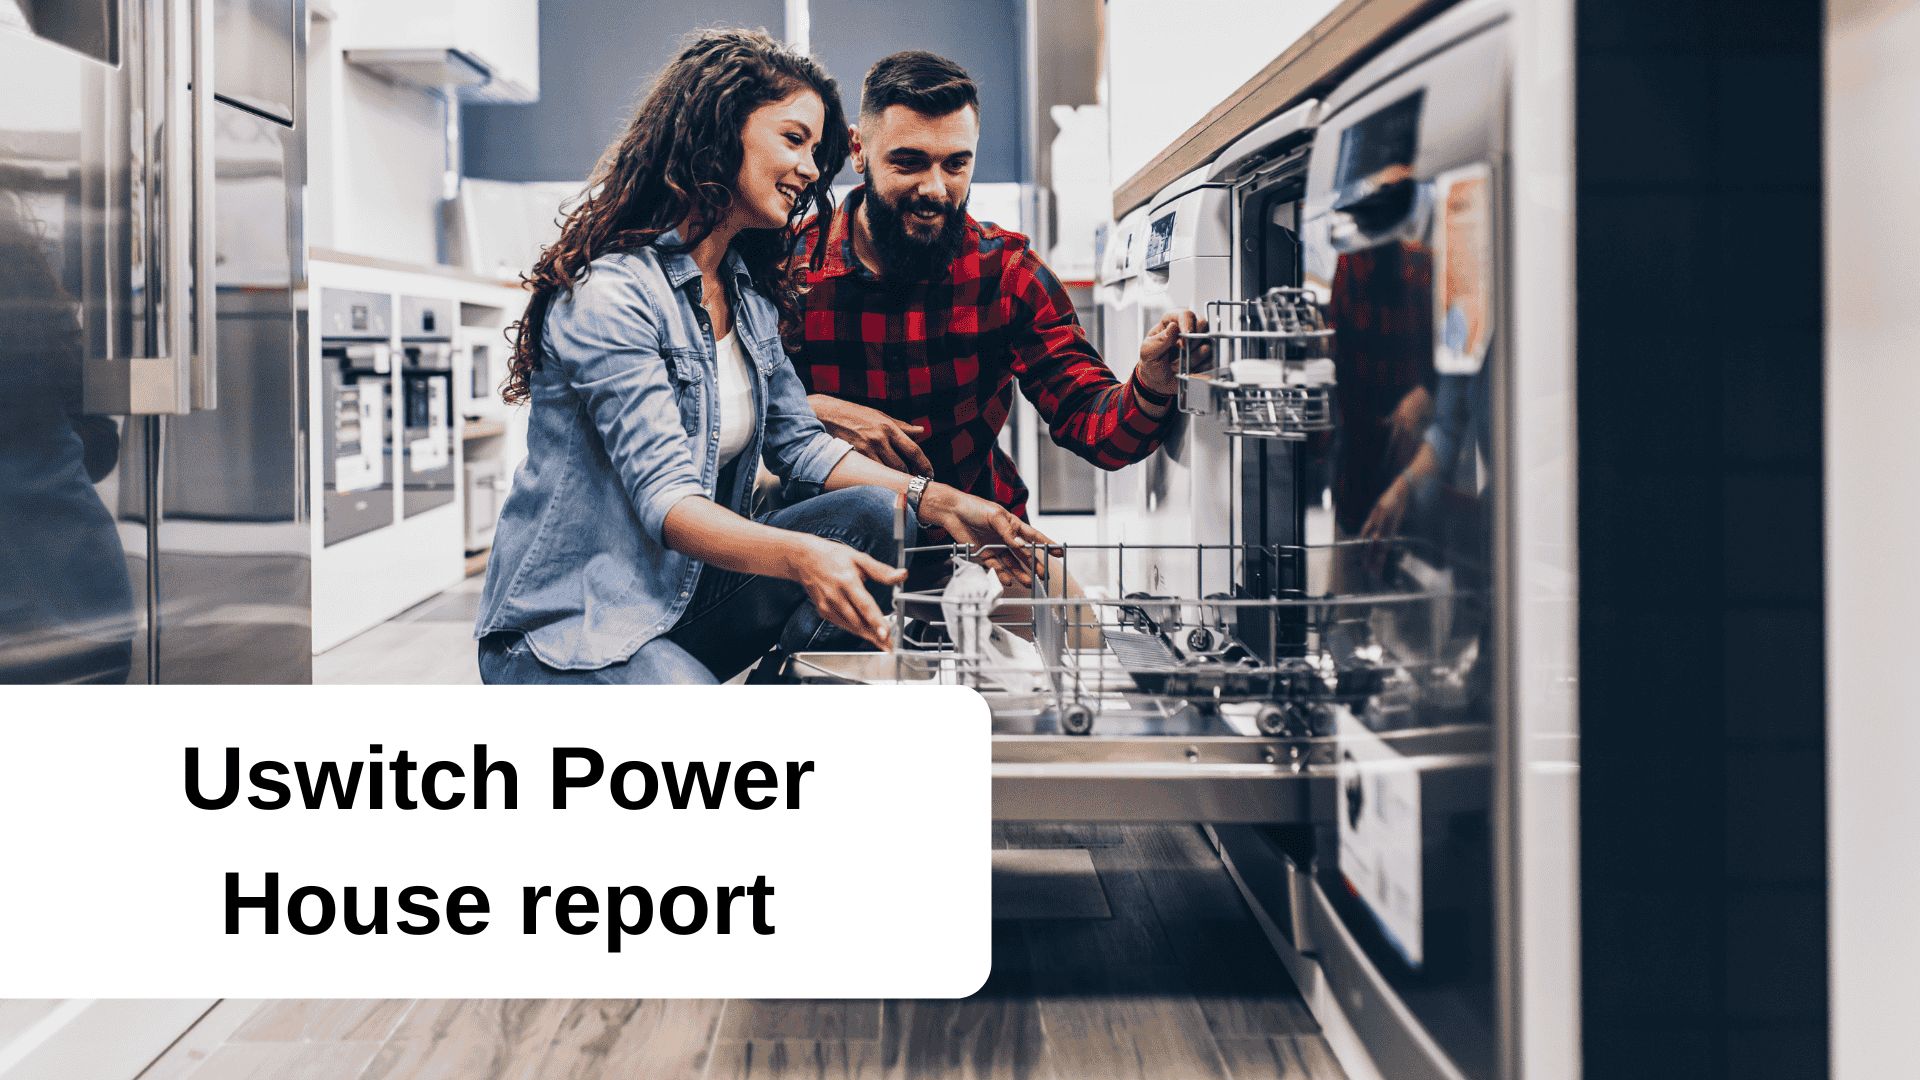 image of a couple unloading a dishwasher with the title 'Uswitch power house report'